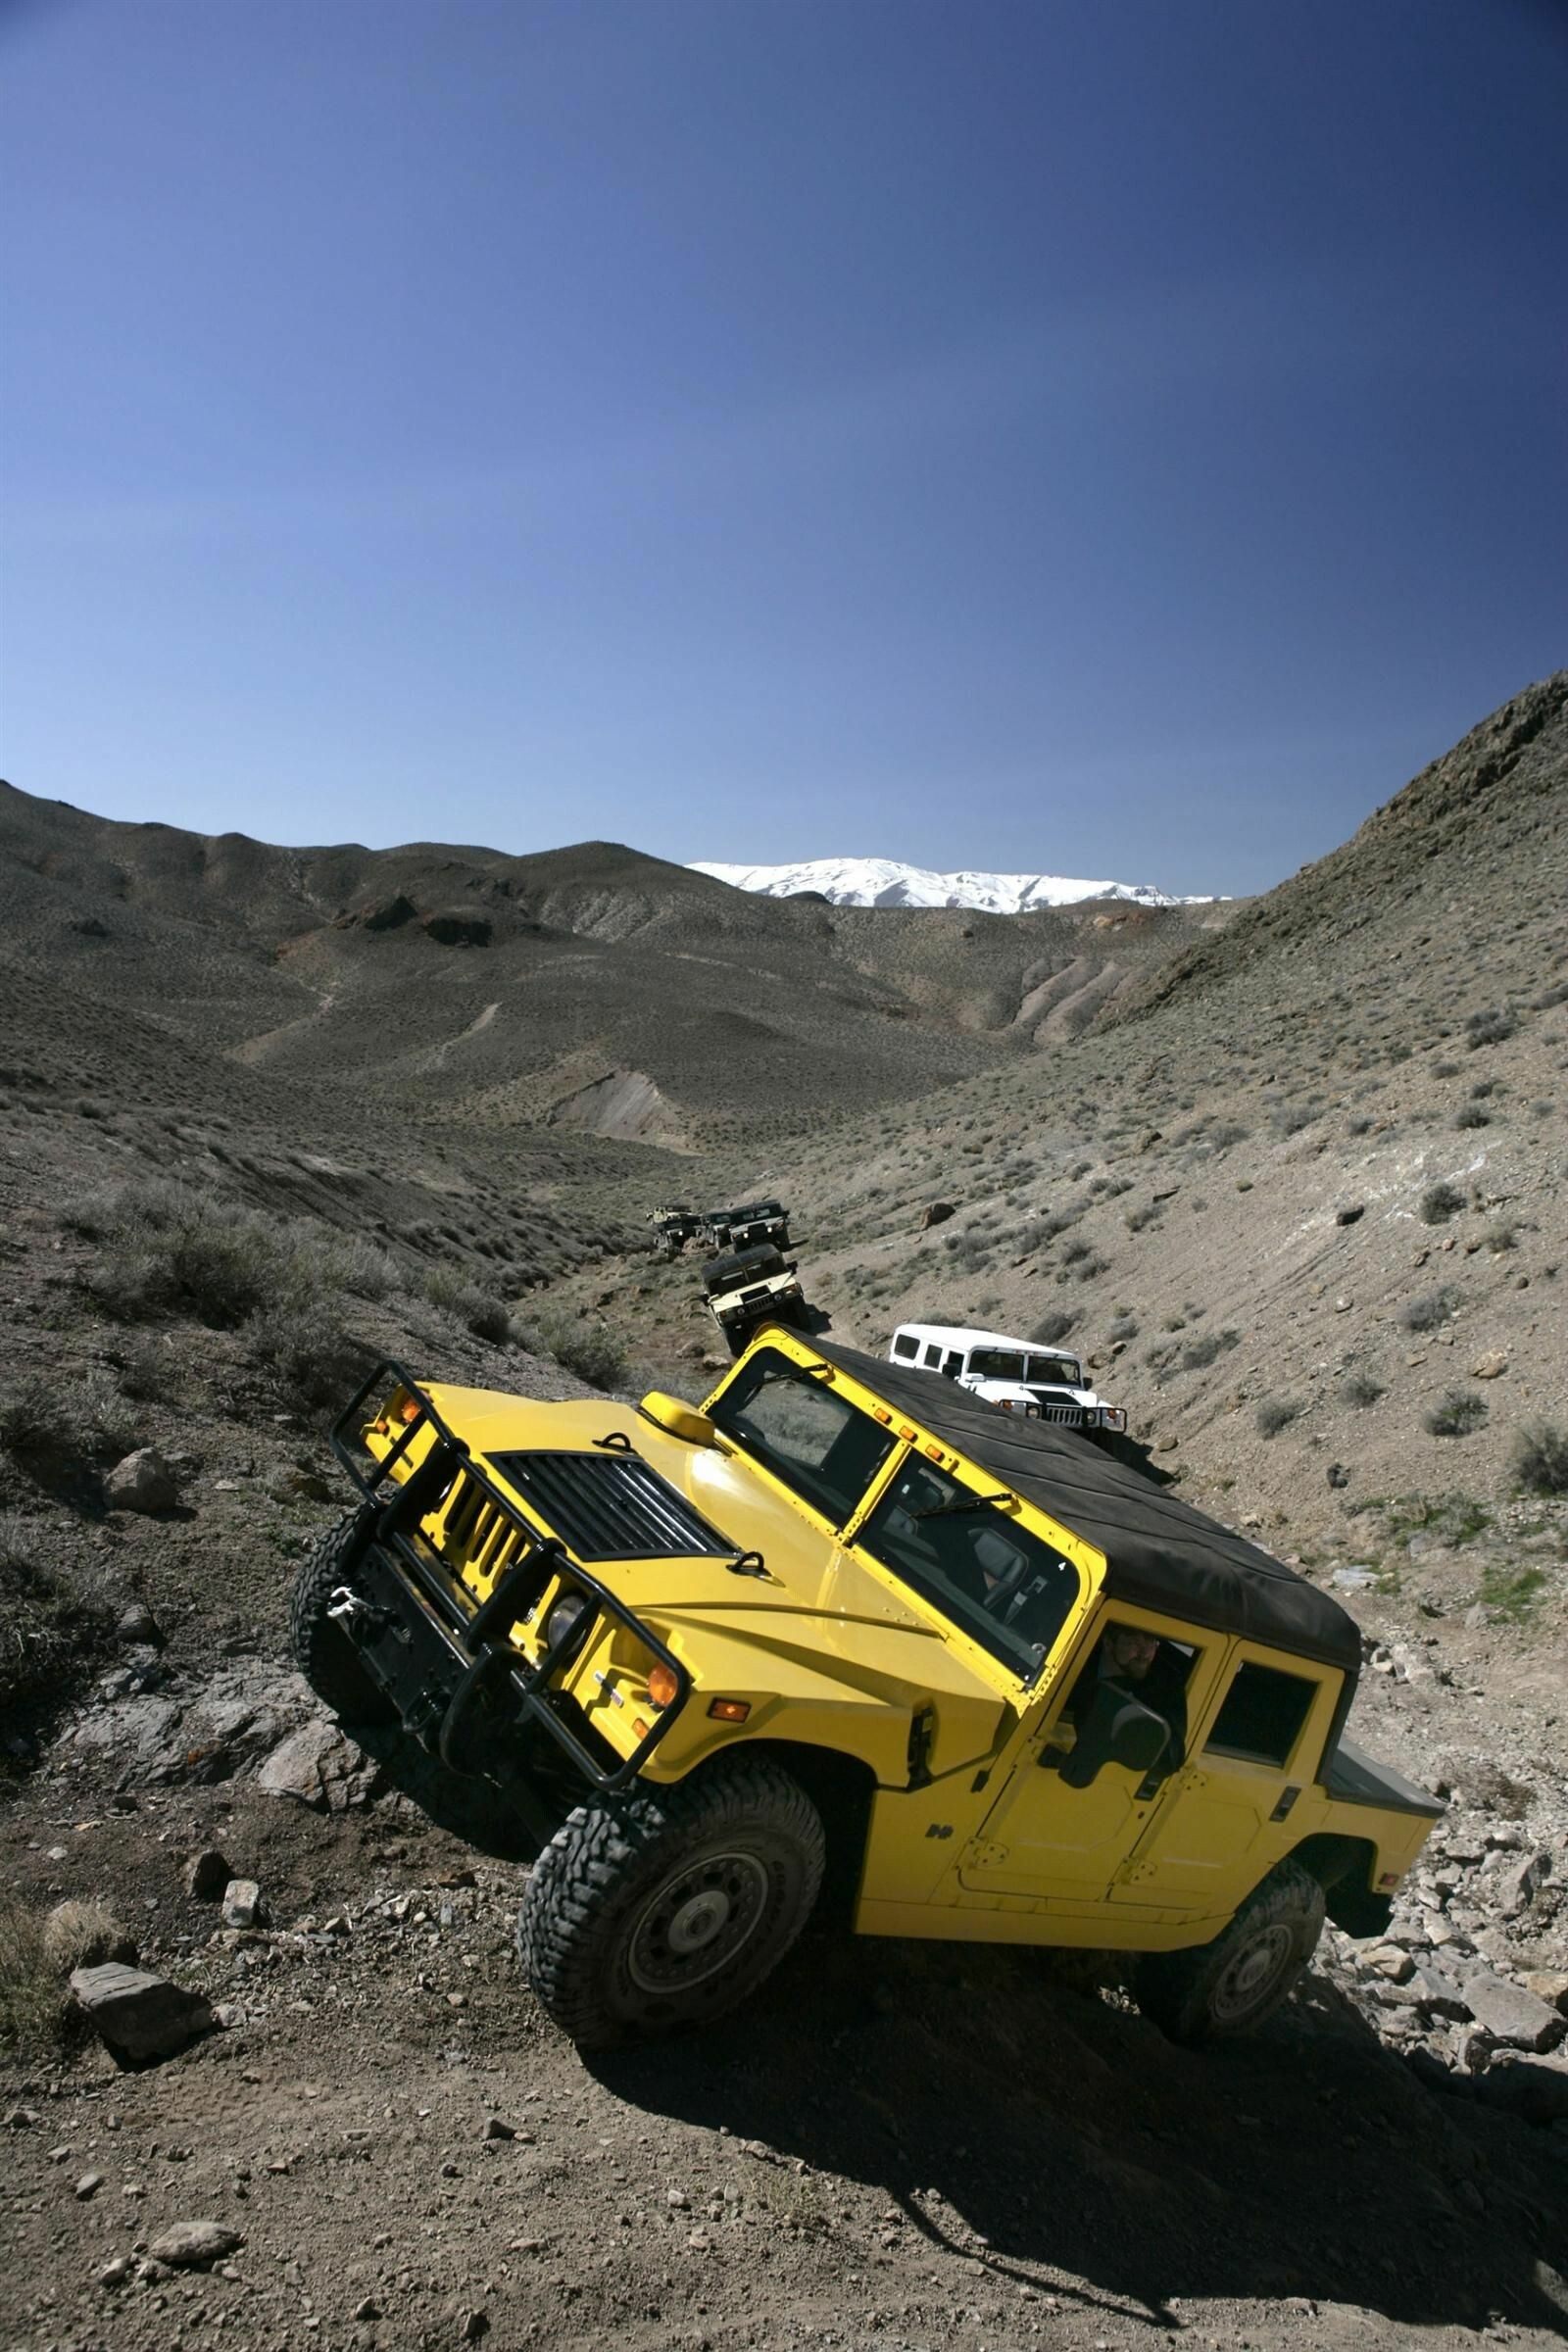 Hummer: 2006 H1 Alpha, A brand of pickups and SUVs that was first marketed in 1992 by AM General. 1600x2400 HD Wallpaper.